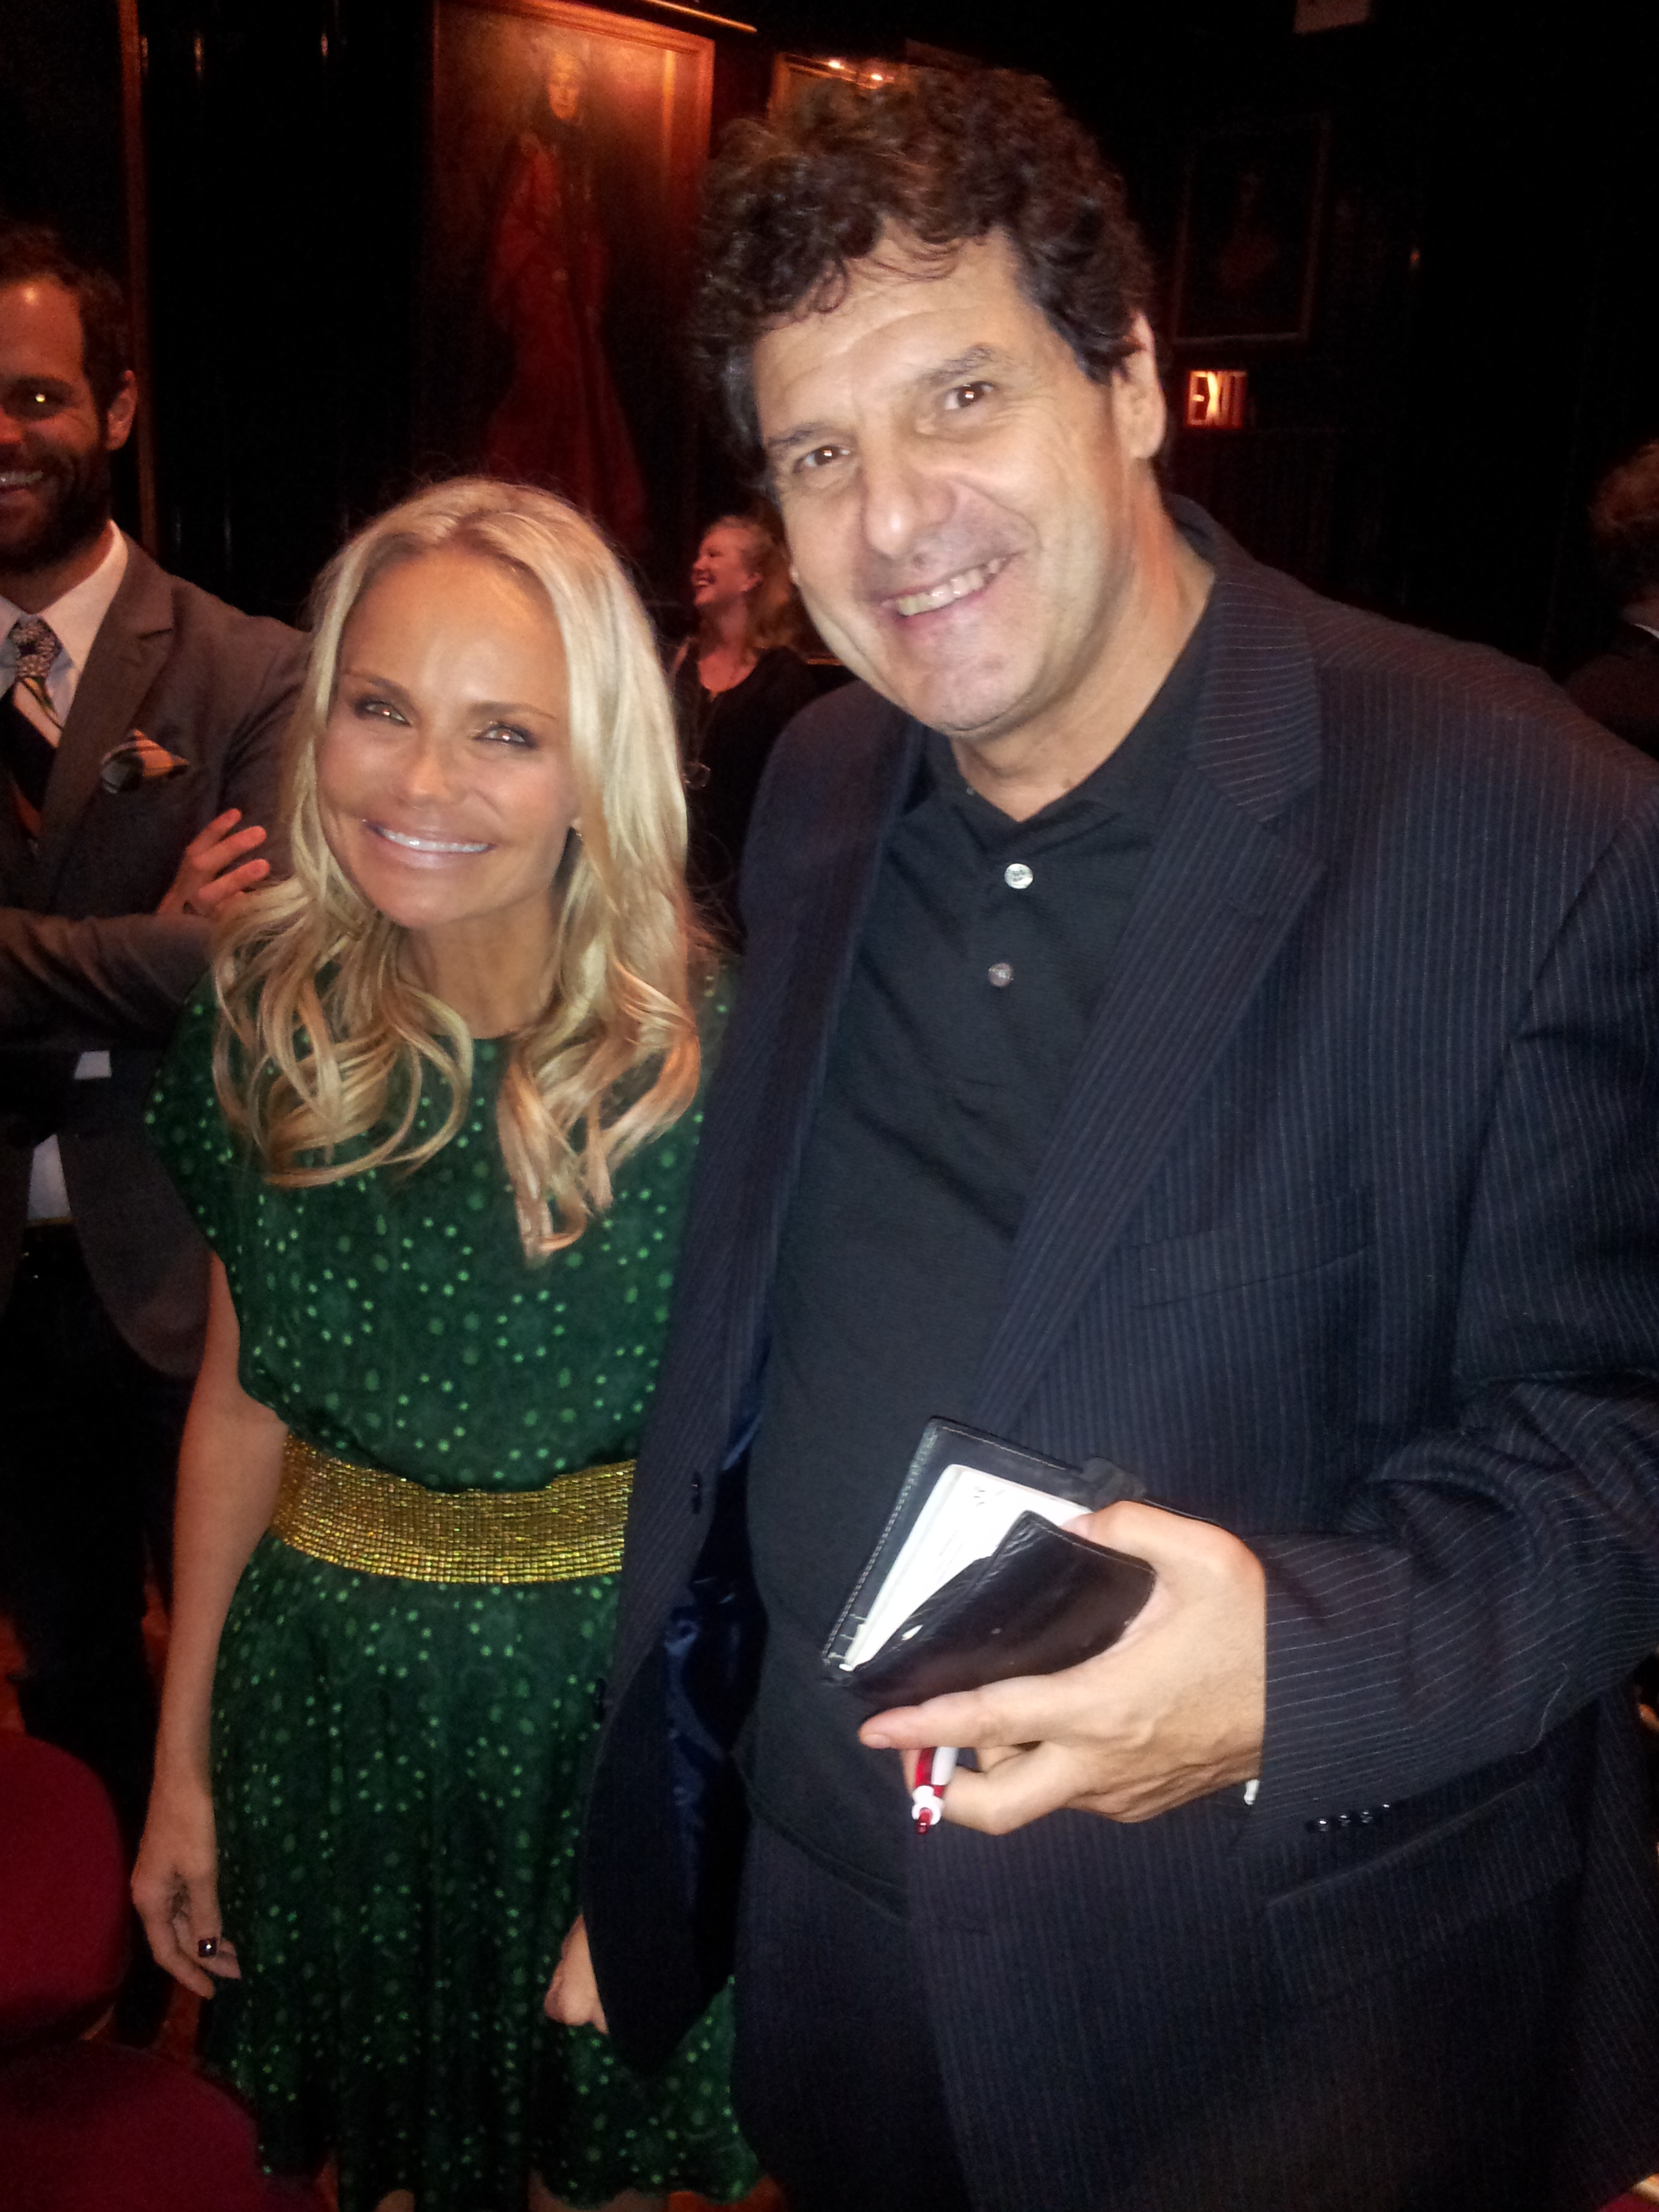 Emmy Award winner Kristin Chenoweth (Glee, Pushing Daisies, The Pink Panther) and Rich Rossi